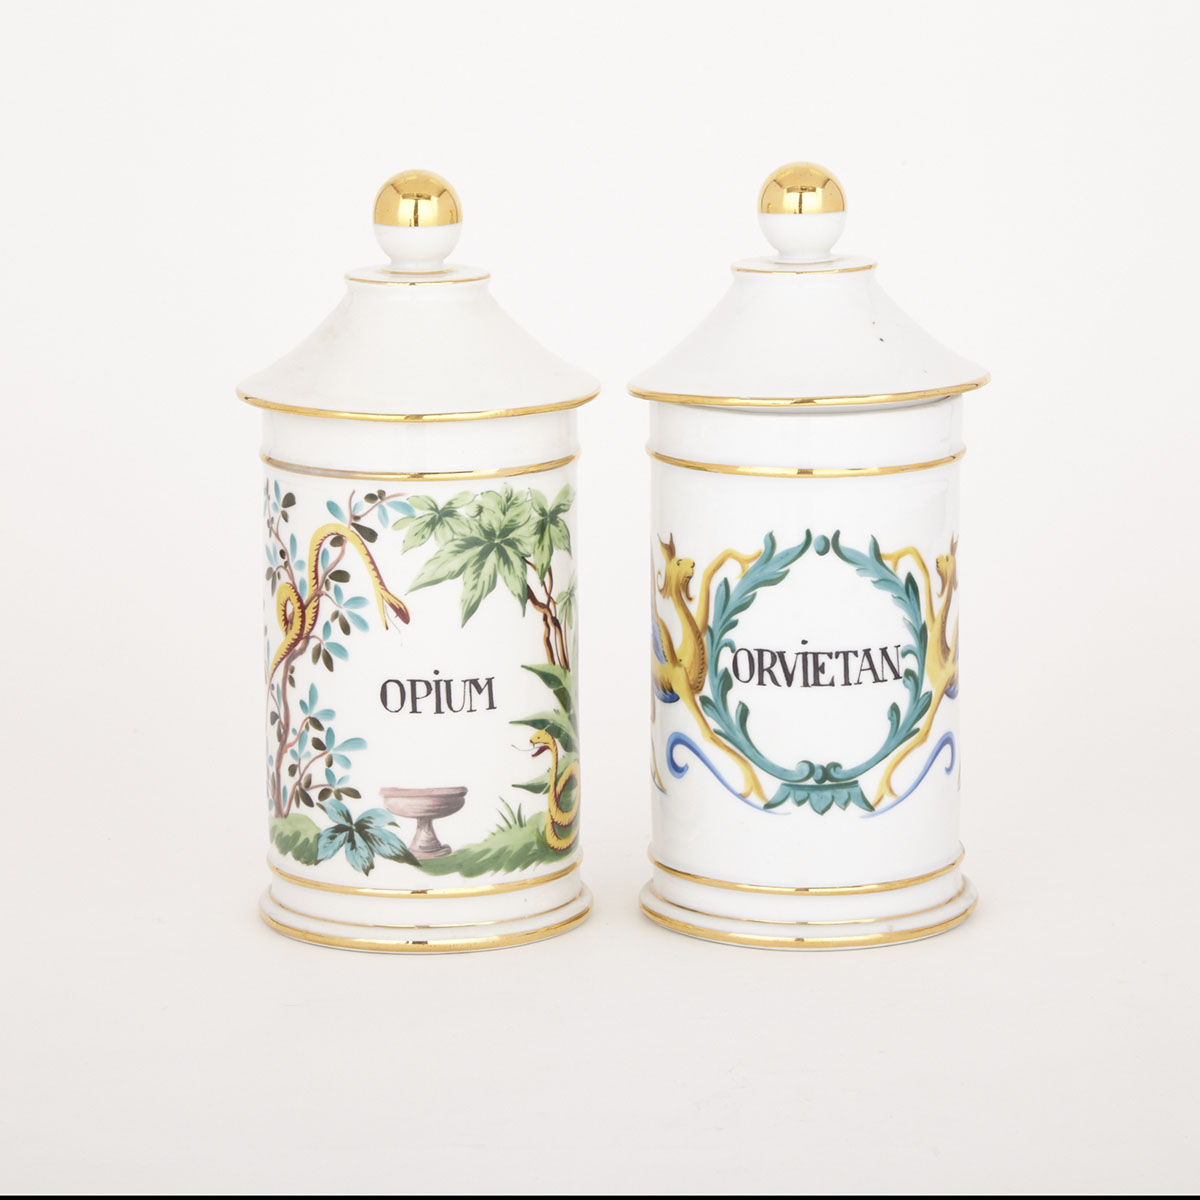 Two French Porcelain Apothecary Jars, 20th century